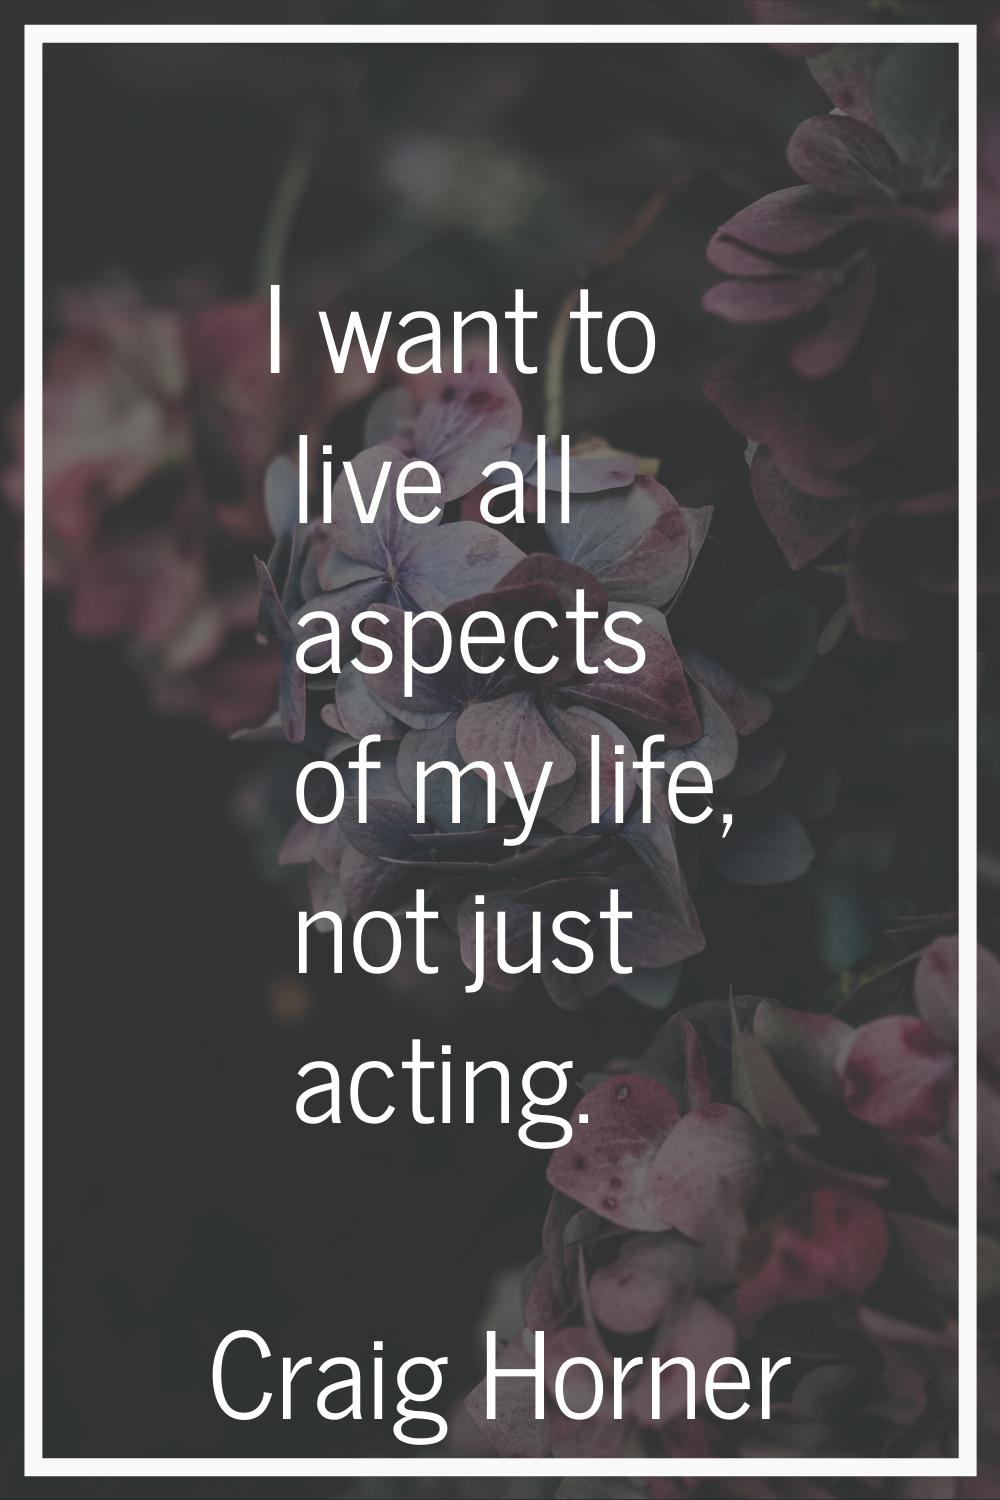 I want to live all aspects of my life, not just acting.